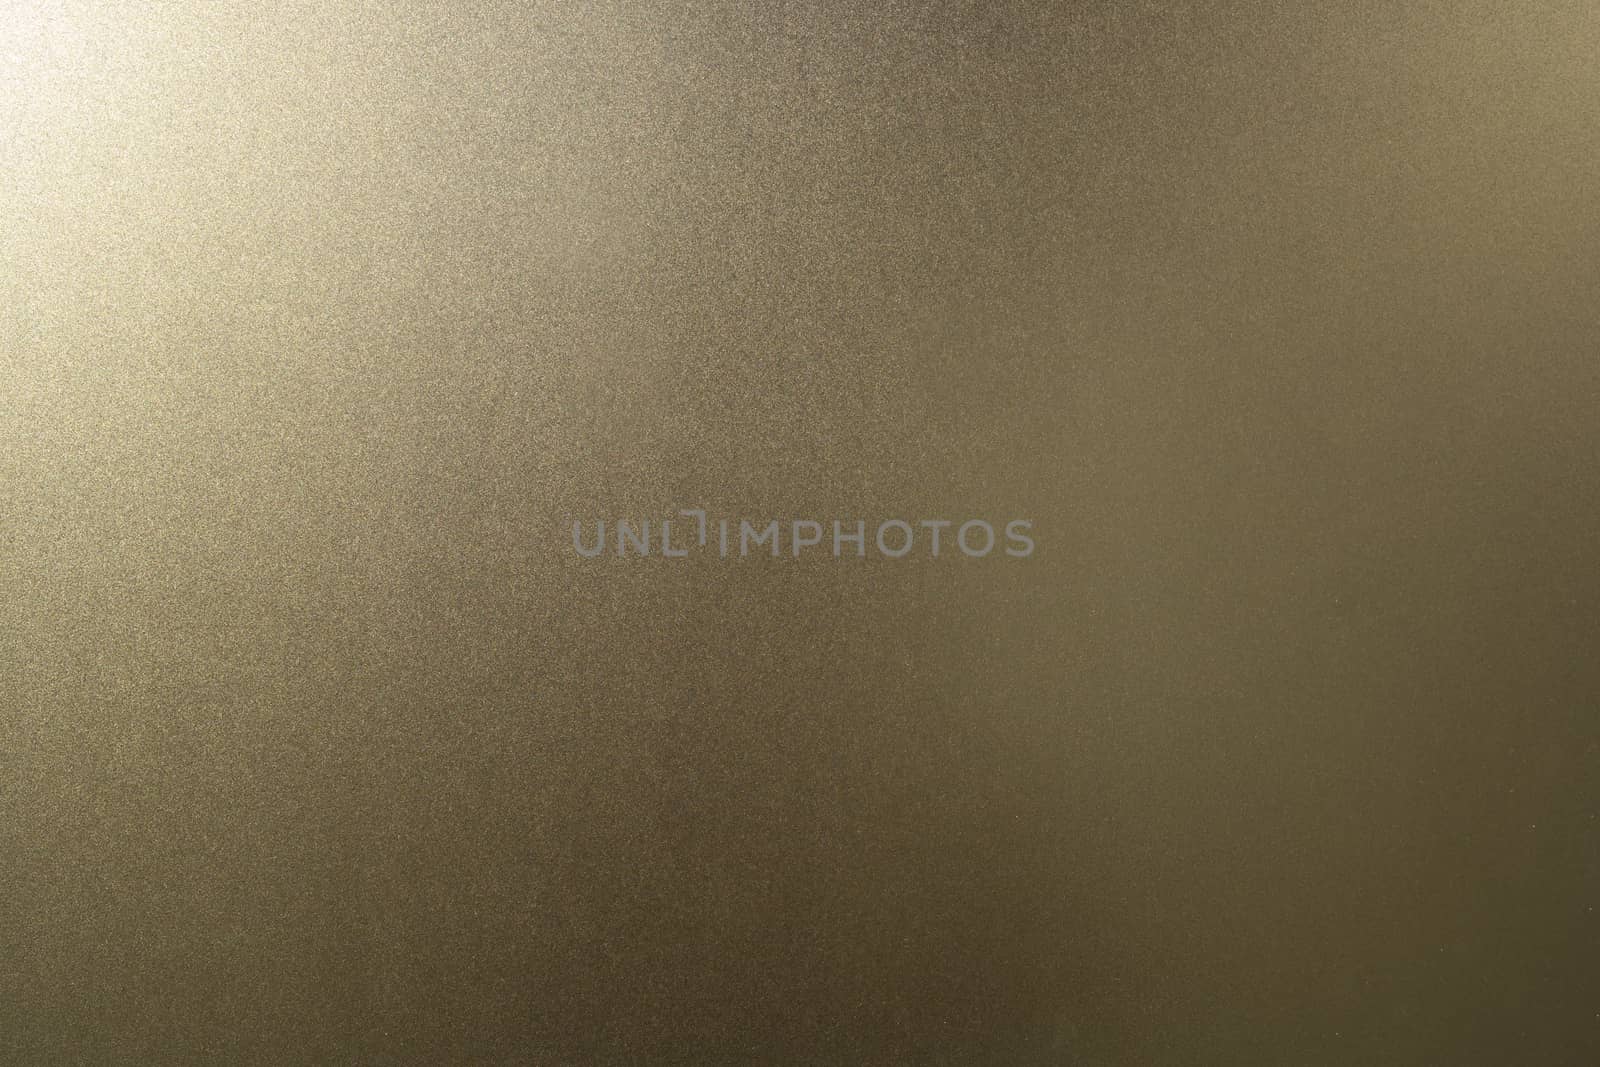 Bronze metal technology background with polished, brushed metal texture,copper for design concepts, web, prints, posters, wallpapers, interfaces.